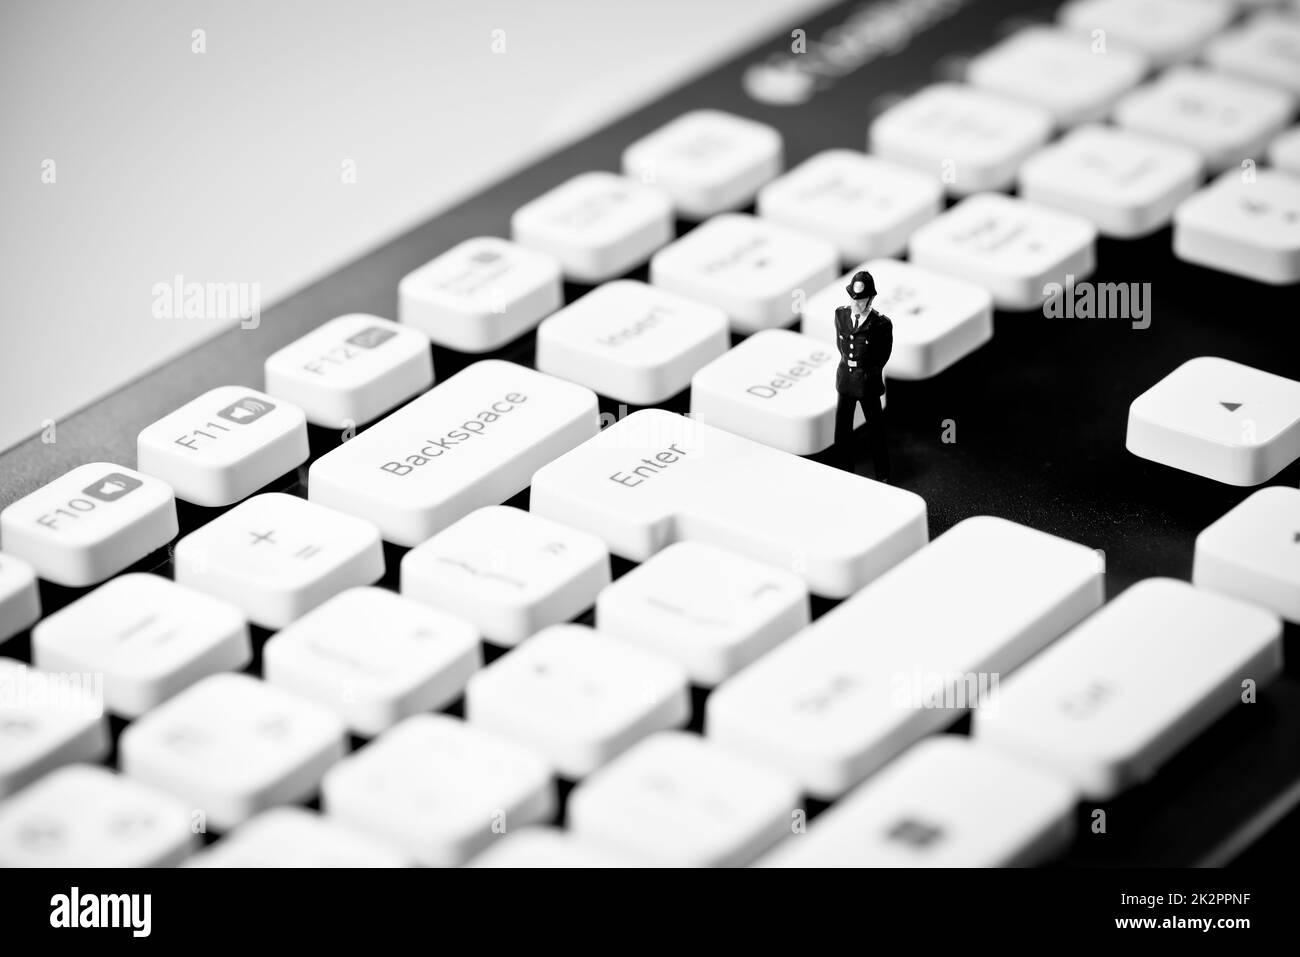 Miniature Police officer on top of computer keyboard. Internet piracy and criminality cpncept Stock Photo